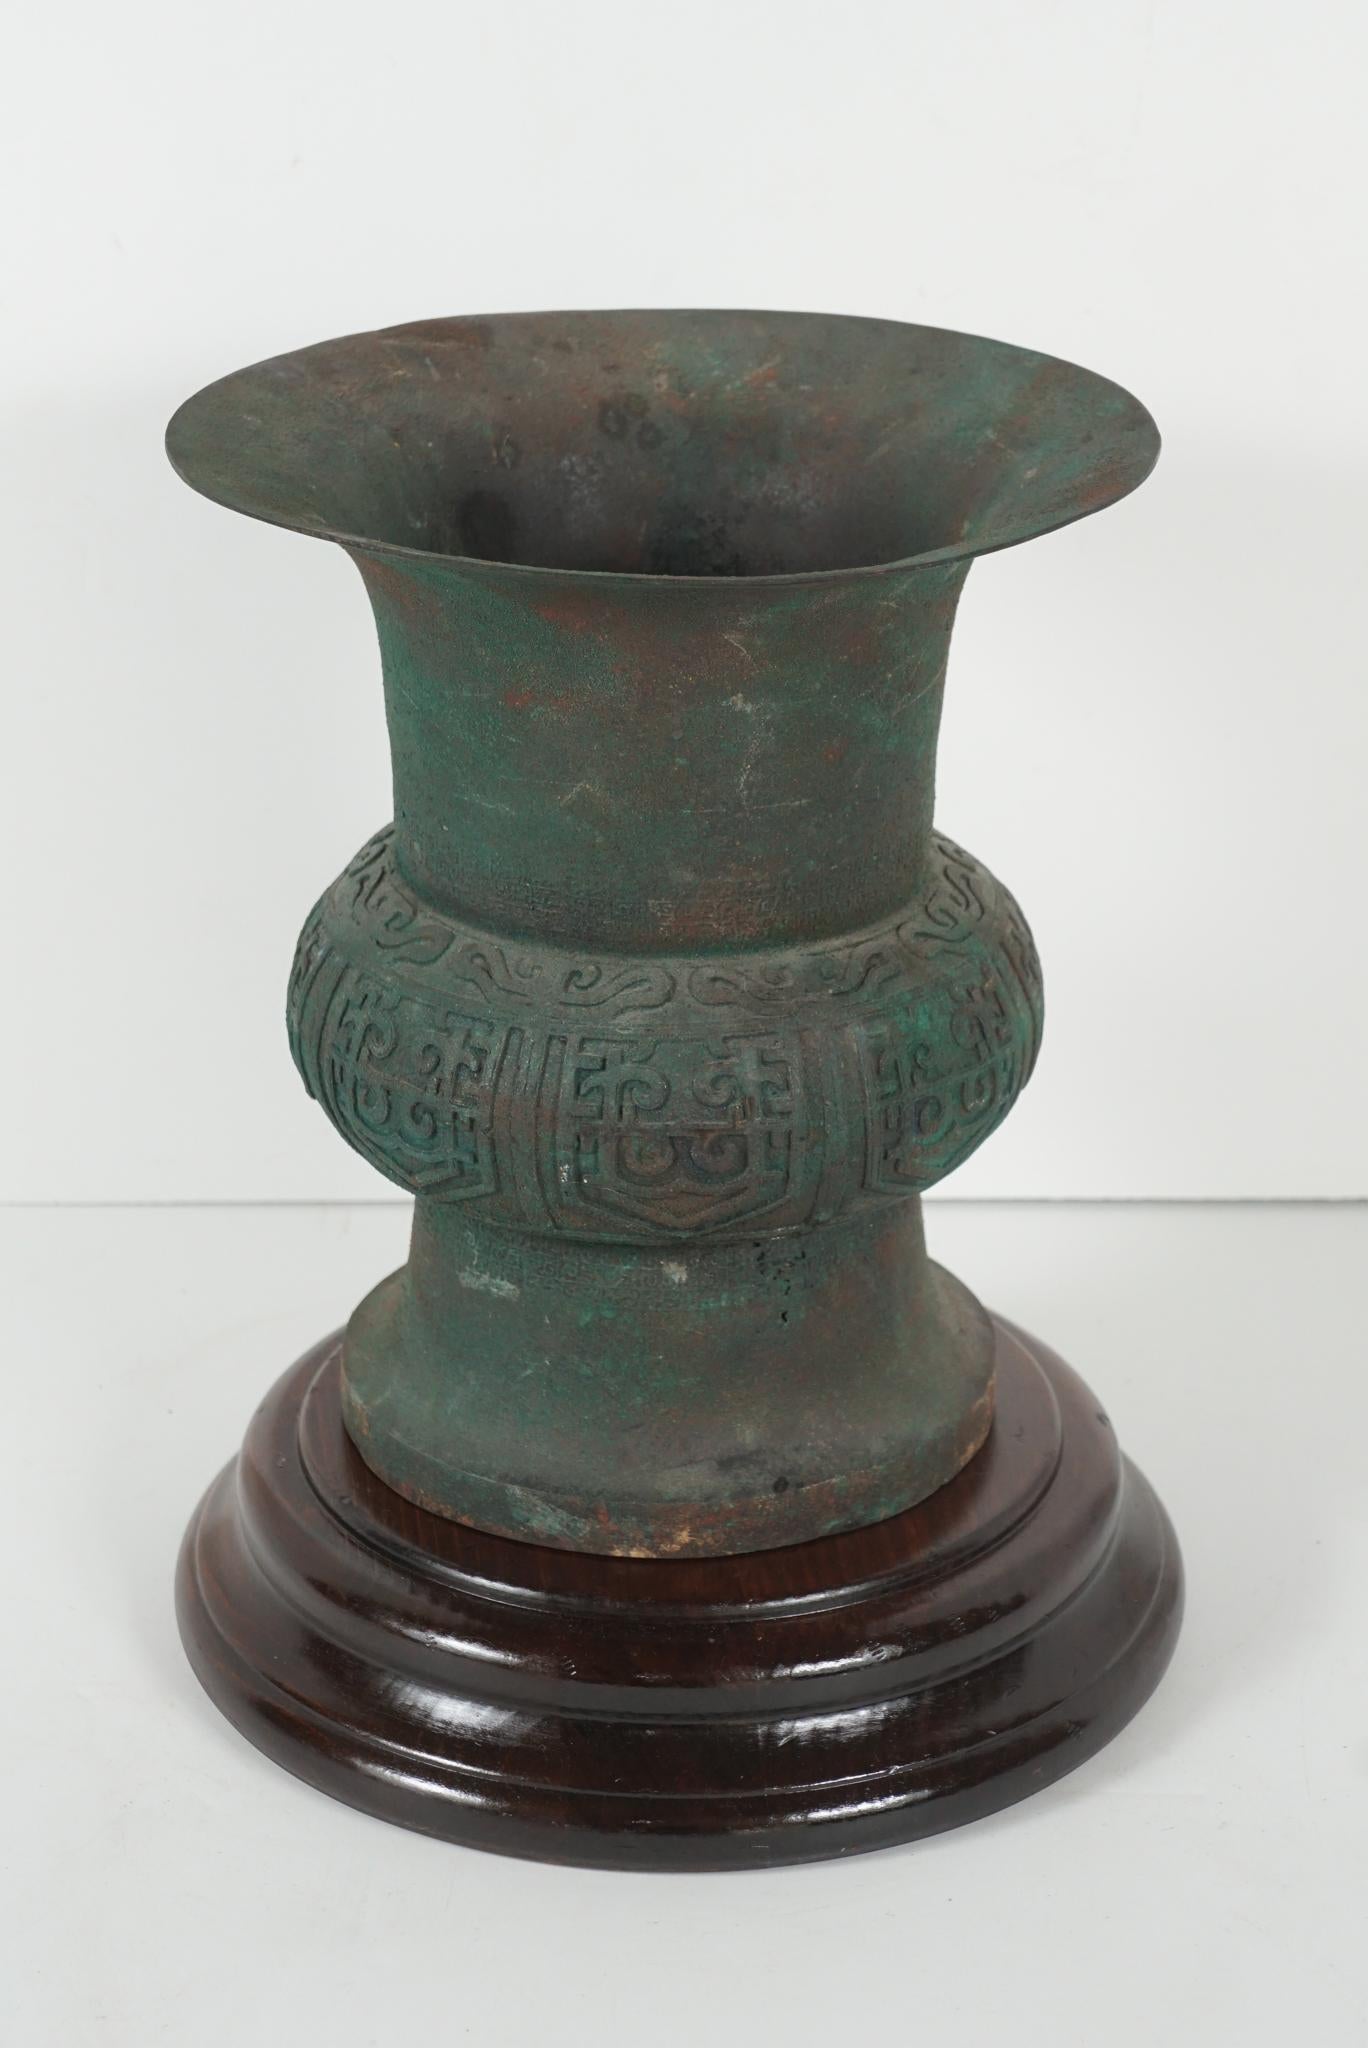 This Chinese cast bronze urn was made to pay honor to the fine vessels produced in the Shang, Zhou and Han periods. This work cast in the late 18th into the early 19th century (circa 1790-1800) has an excellent patina which seems original but could